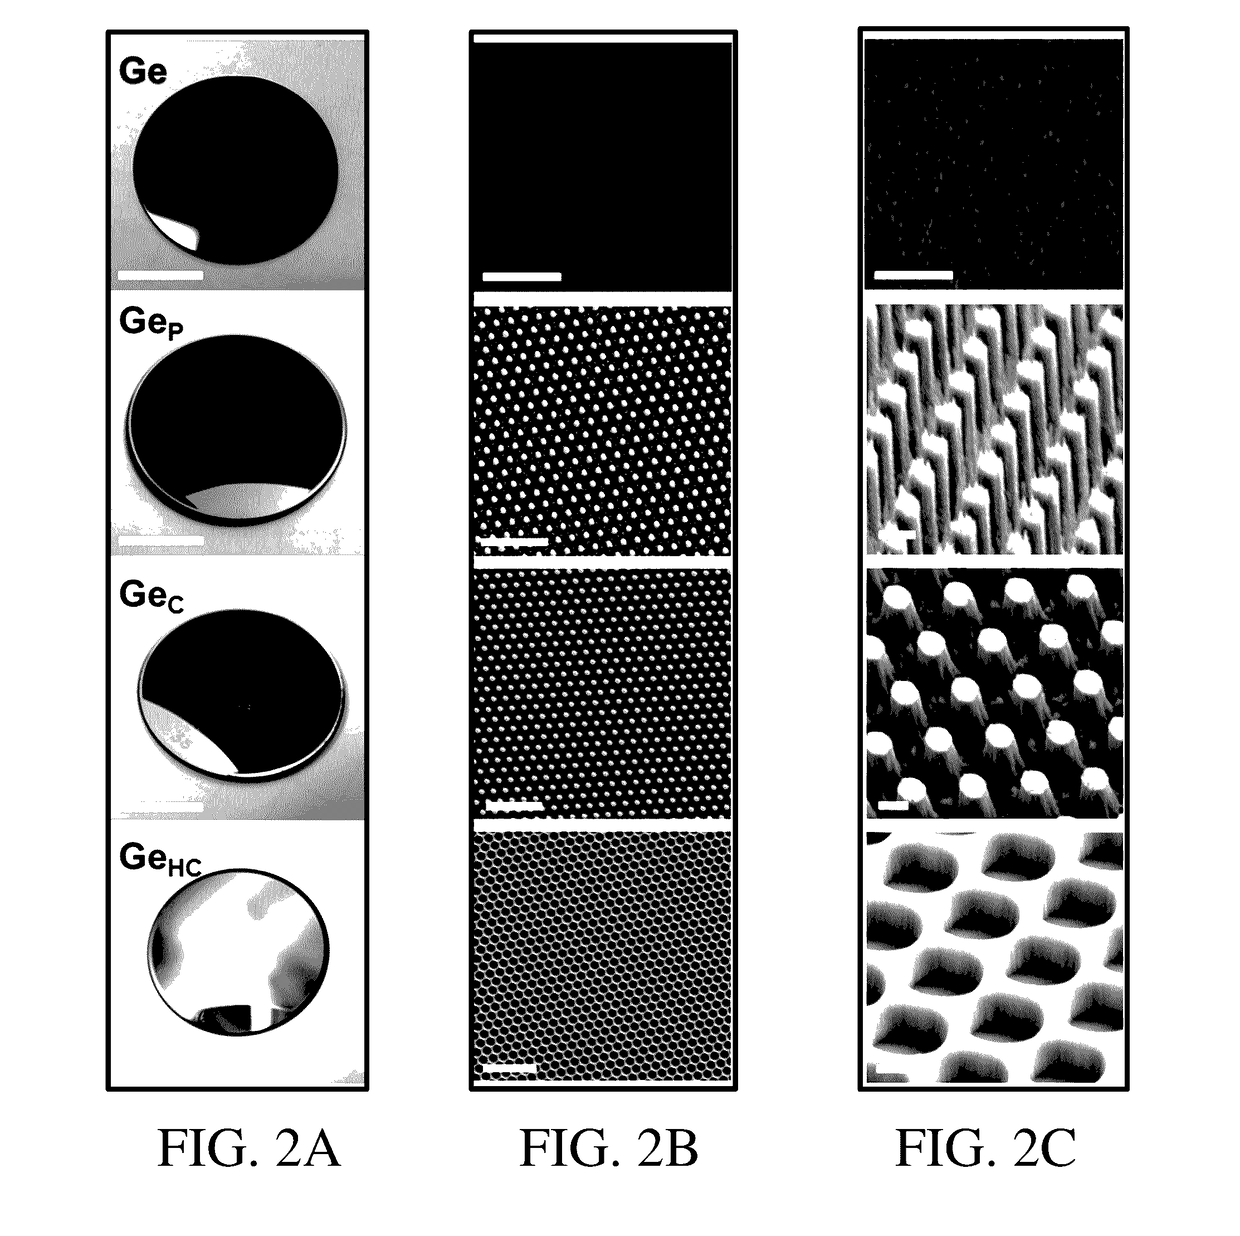 Processing of superhydrophobic, infrared transmissive, Anti-reflective nanostructured surfaces